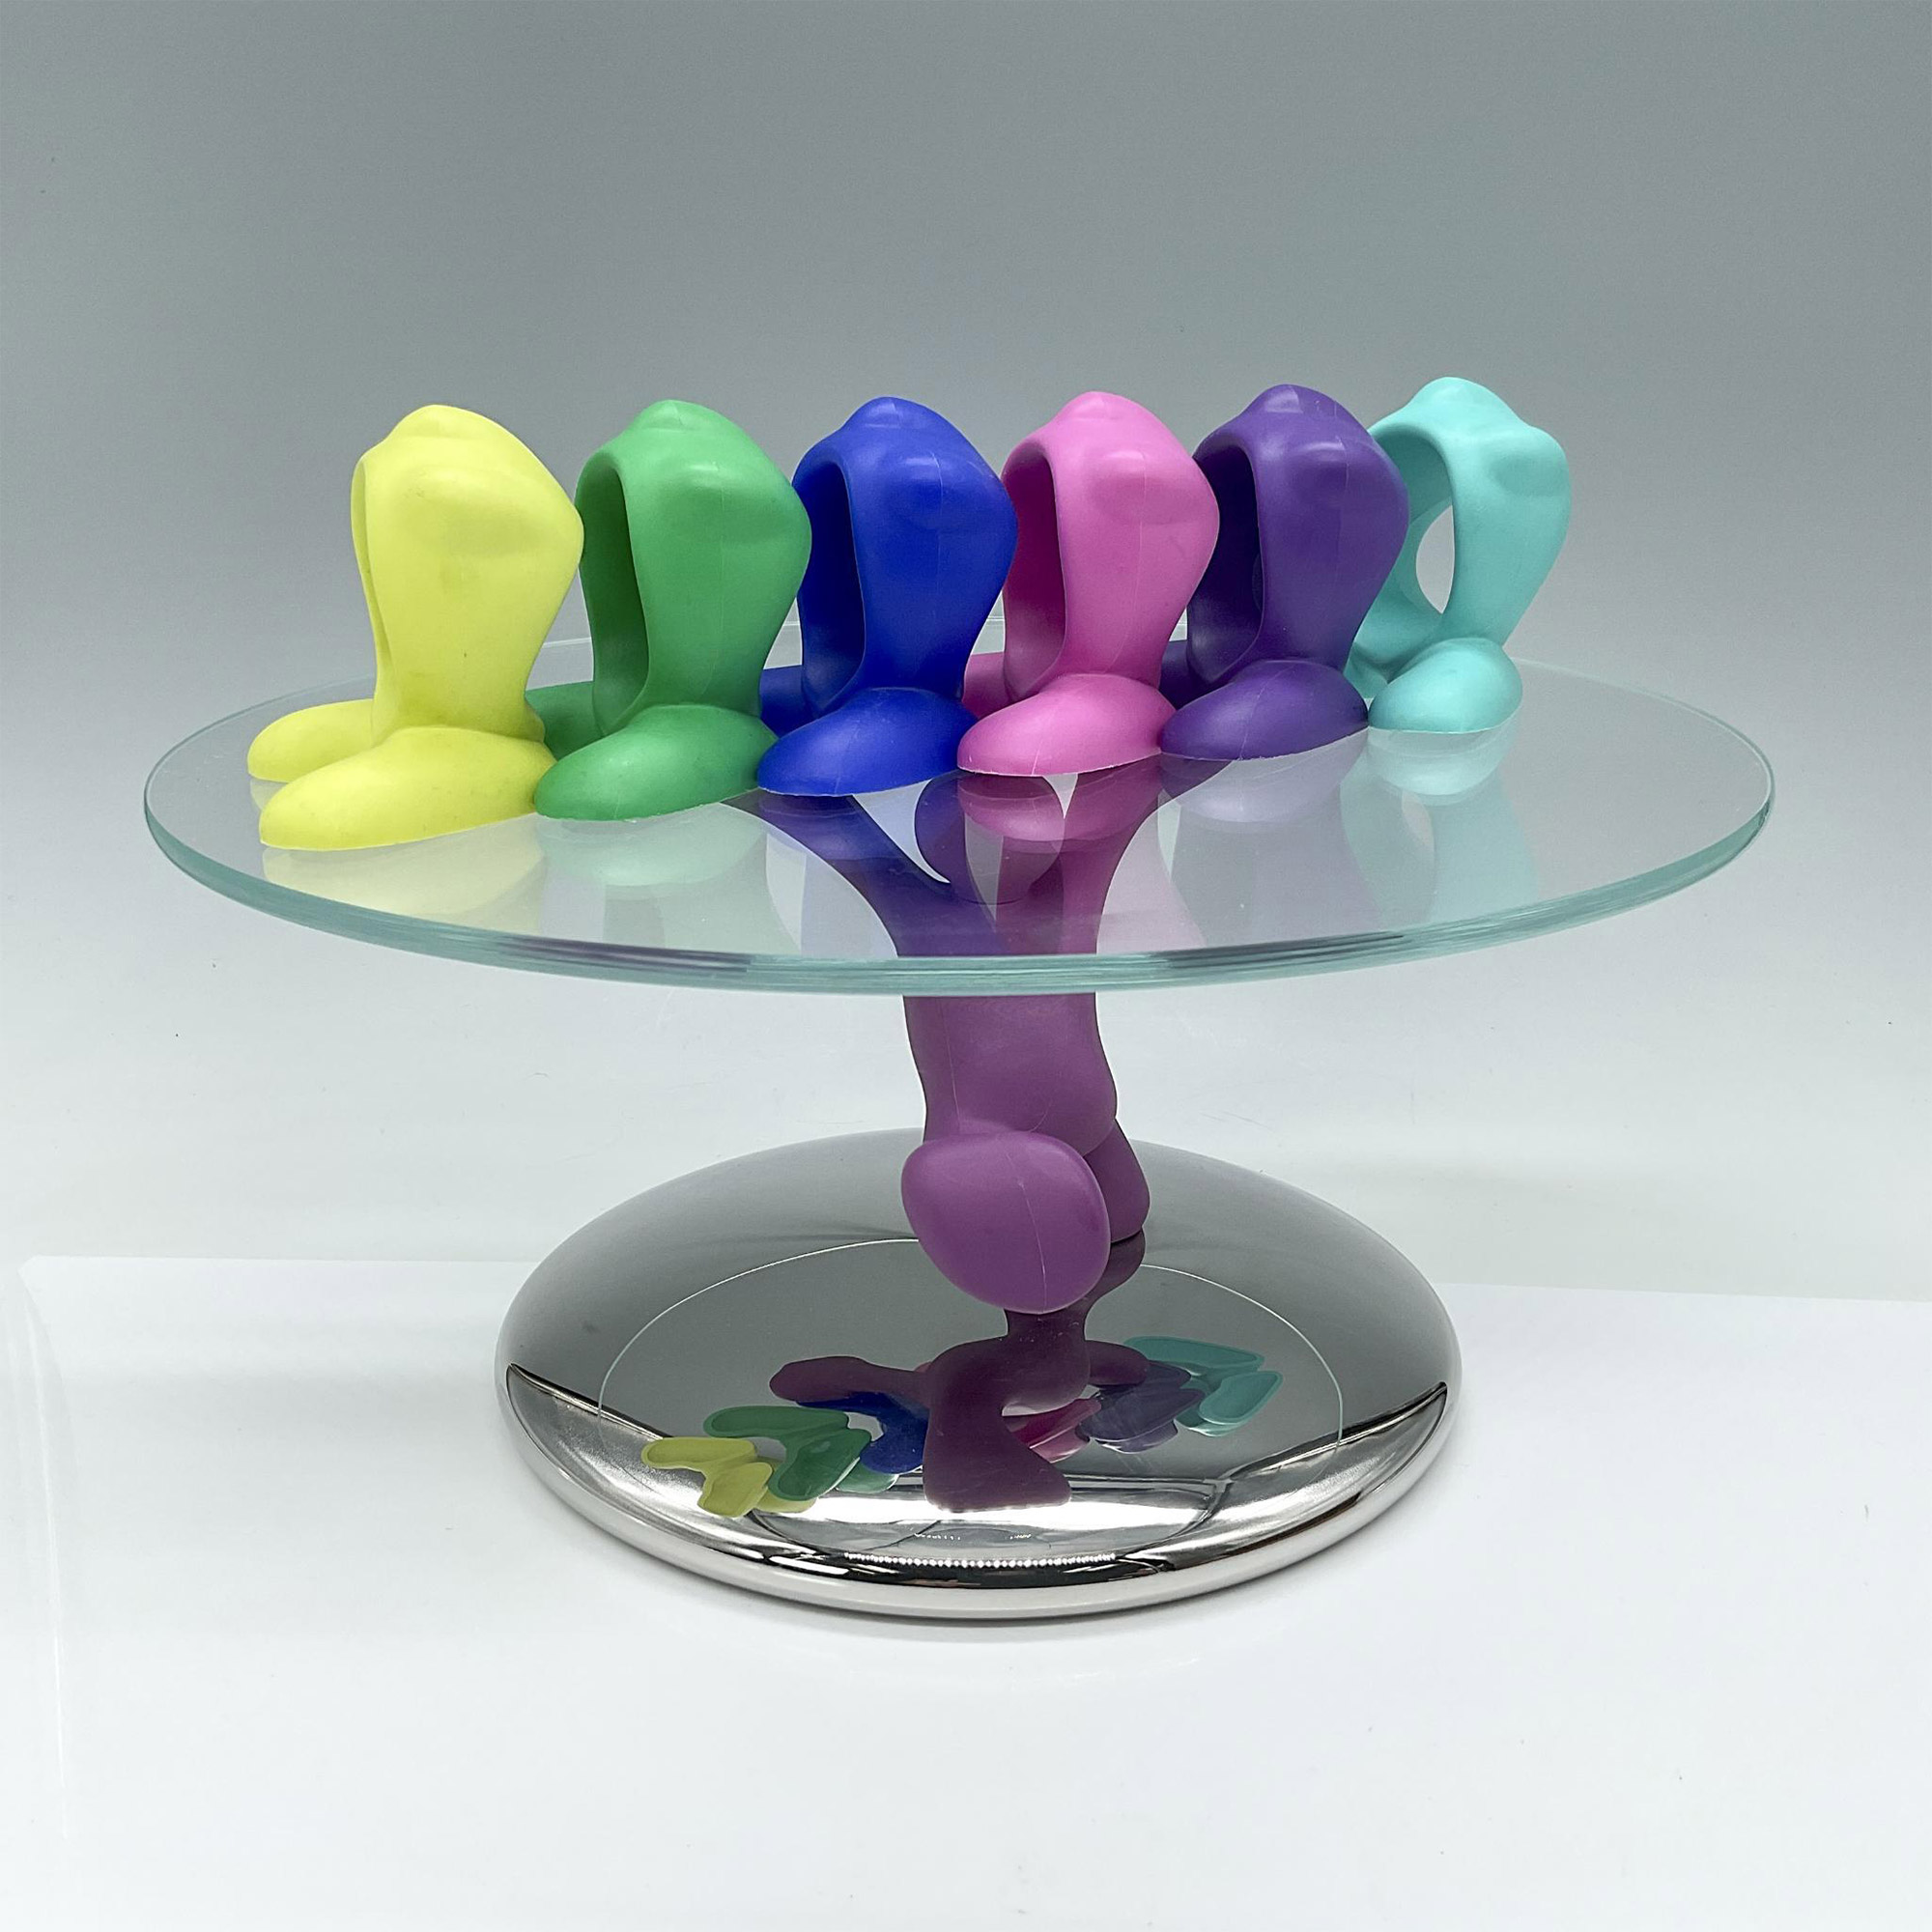 7pc Alessi Colorful Napkin Rings and Cake Stand - Image 2 of 4